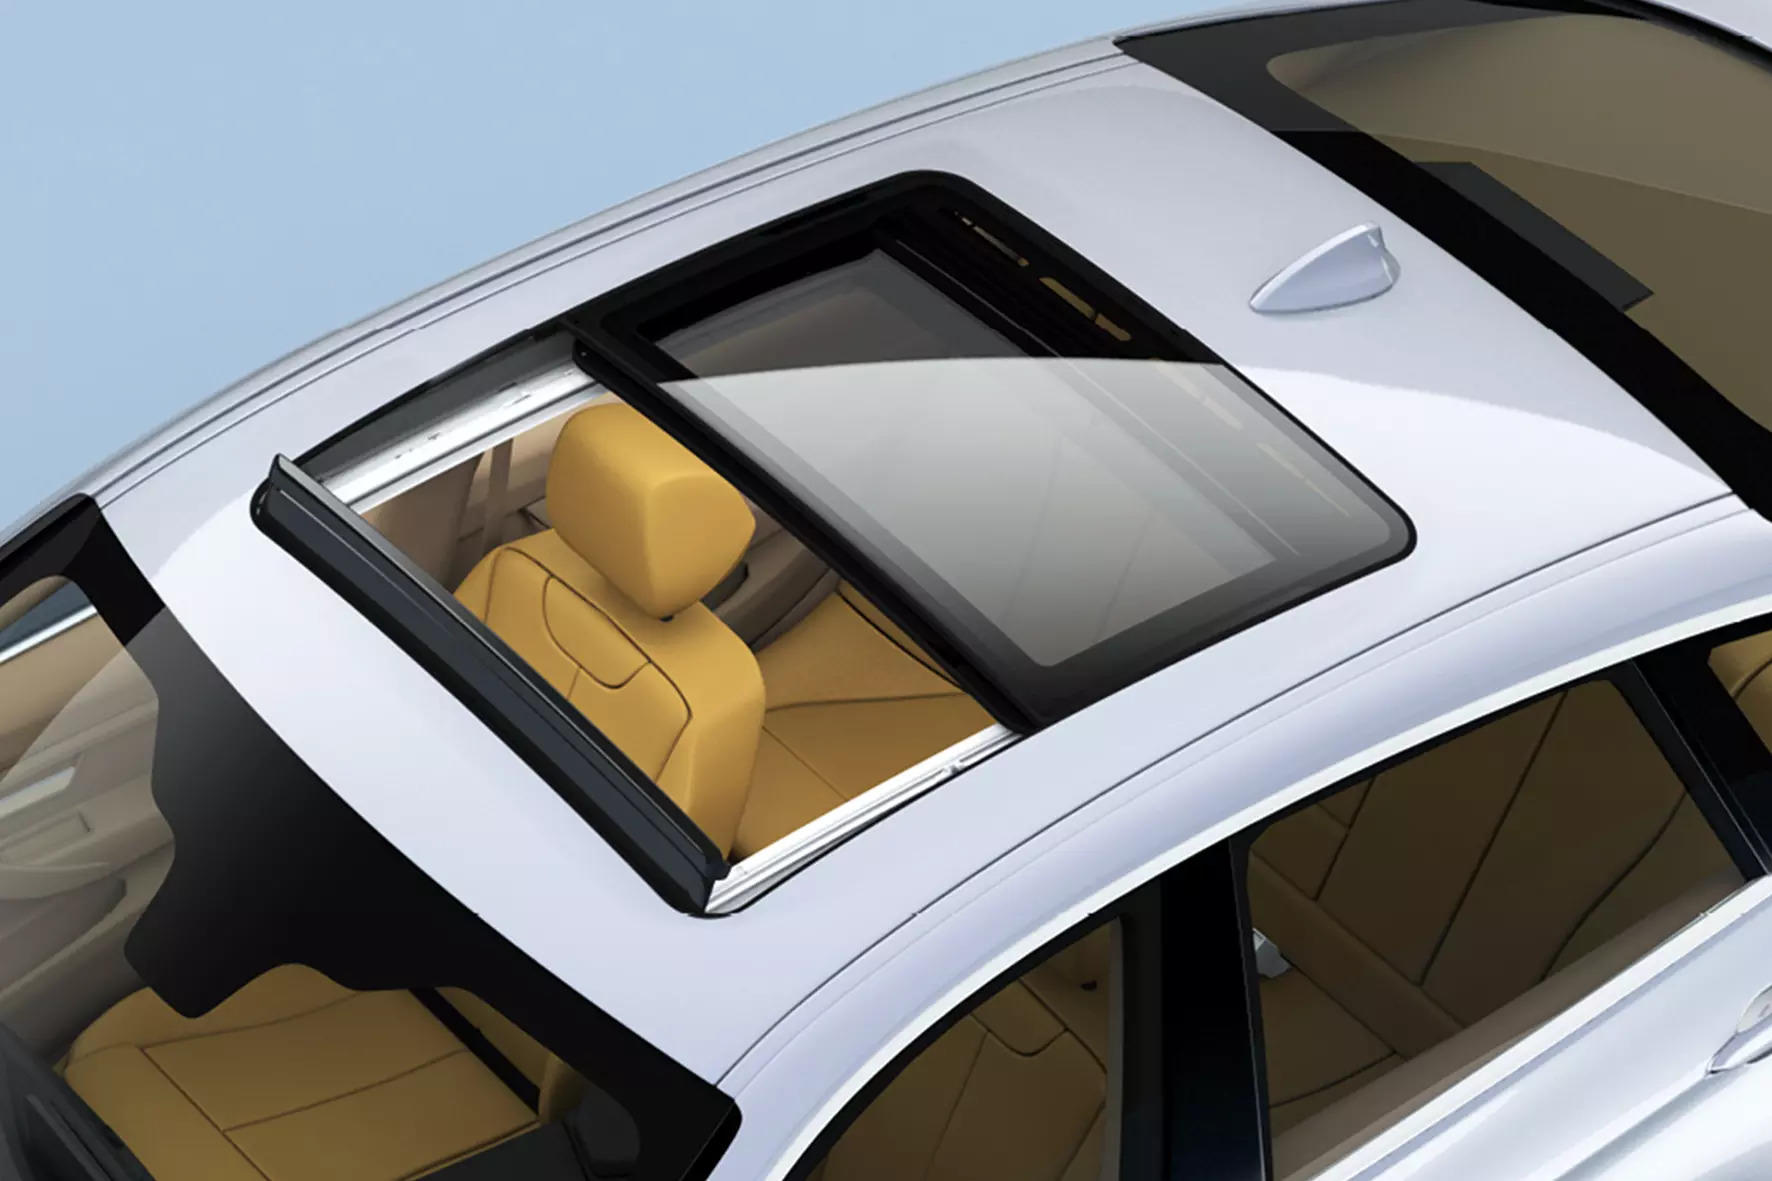 The penetration of the sunroof in the Indian car industry has shot up from 3% 5 years ago, to 24% as of October this year, according to automotive business intelligence provider JATO Dynamics.